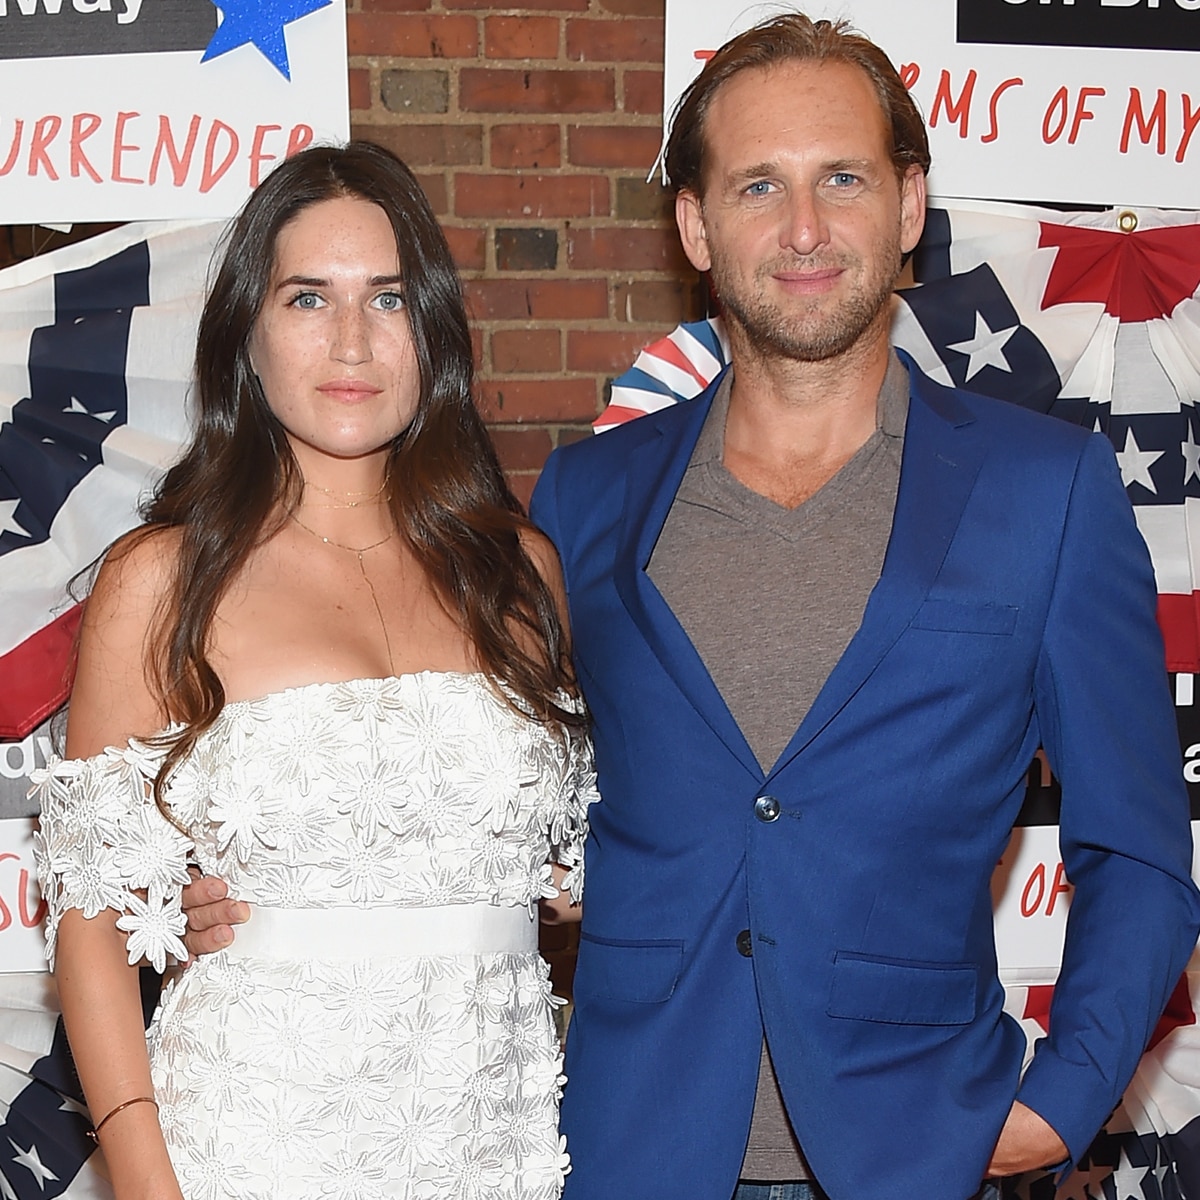 Josh Lucas Ex-Wife, Jessica Ciencin Henriquez, Says Hes a Cheater pic photo